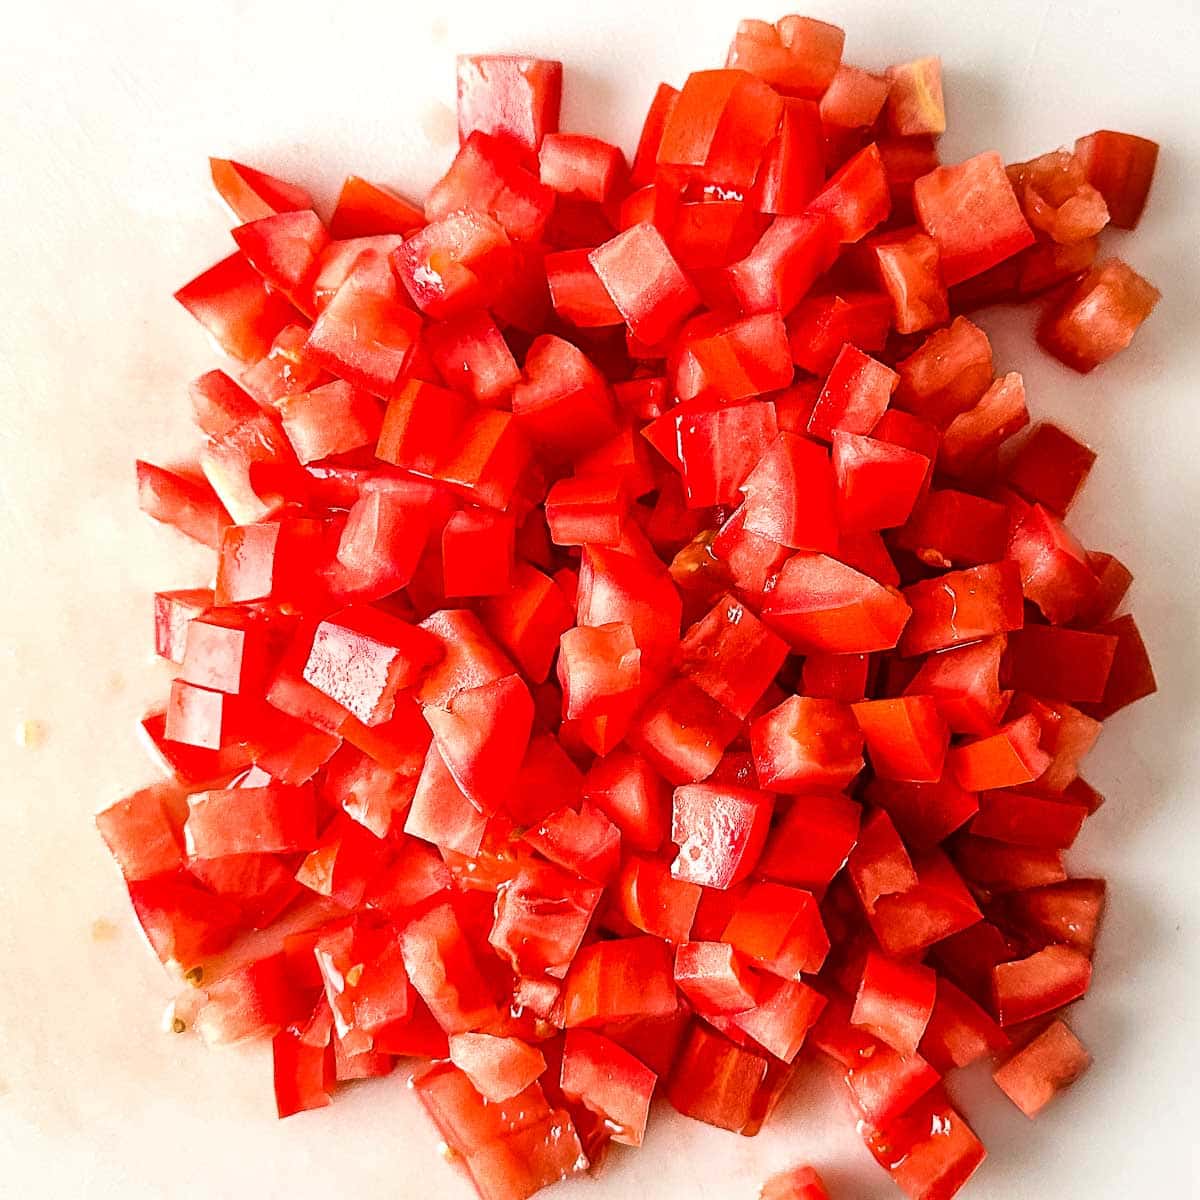 Diced tomato on a white cutting board.